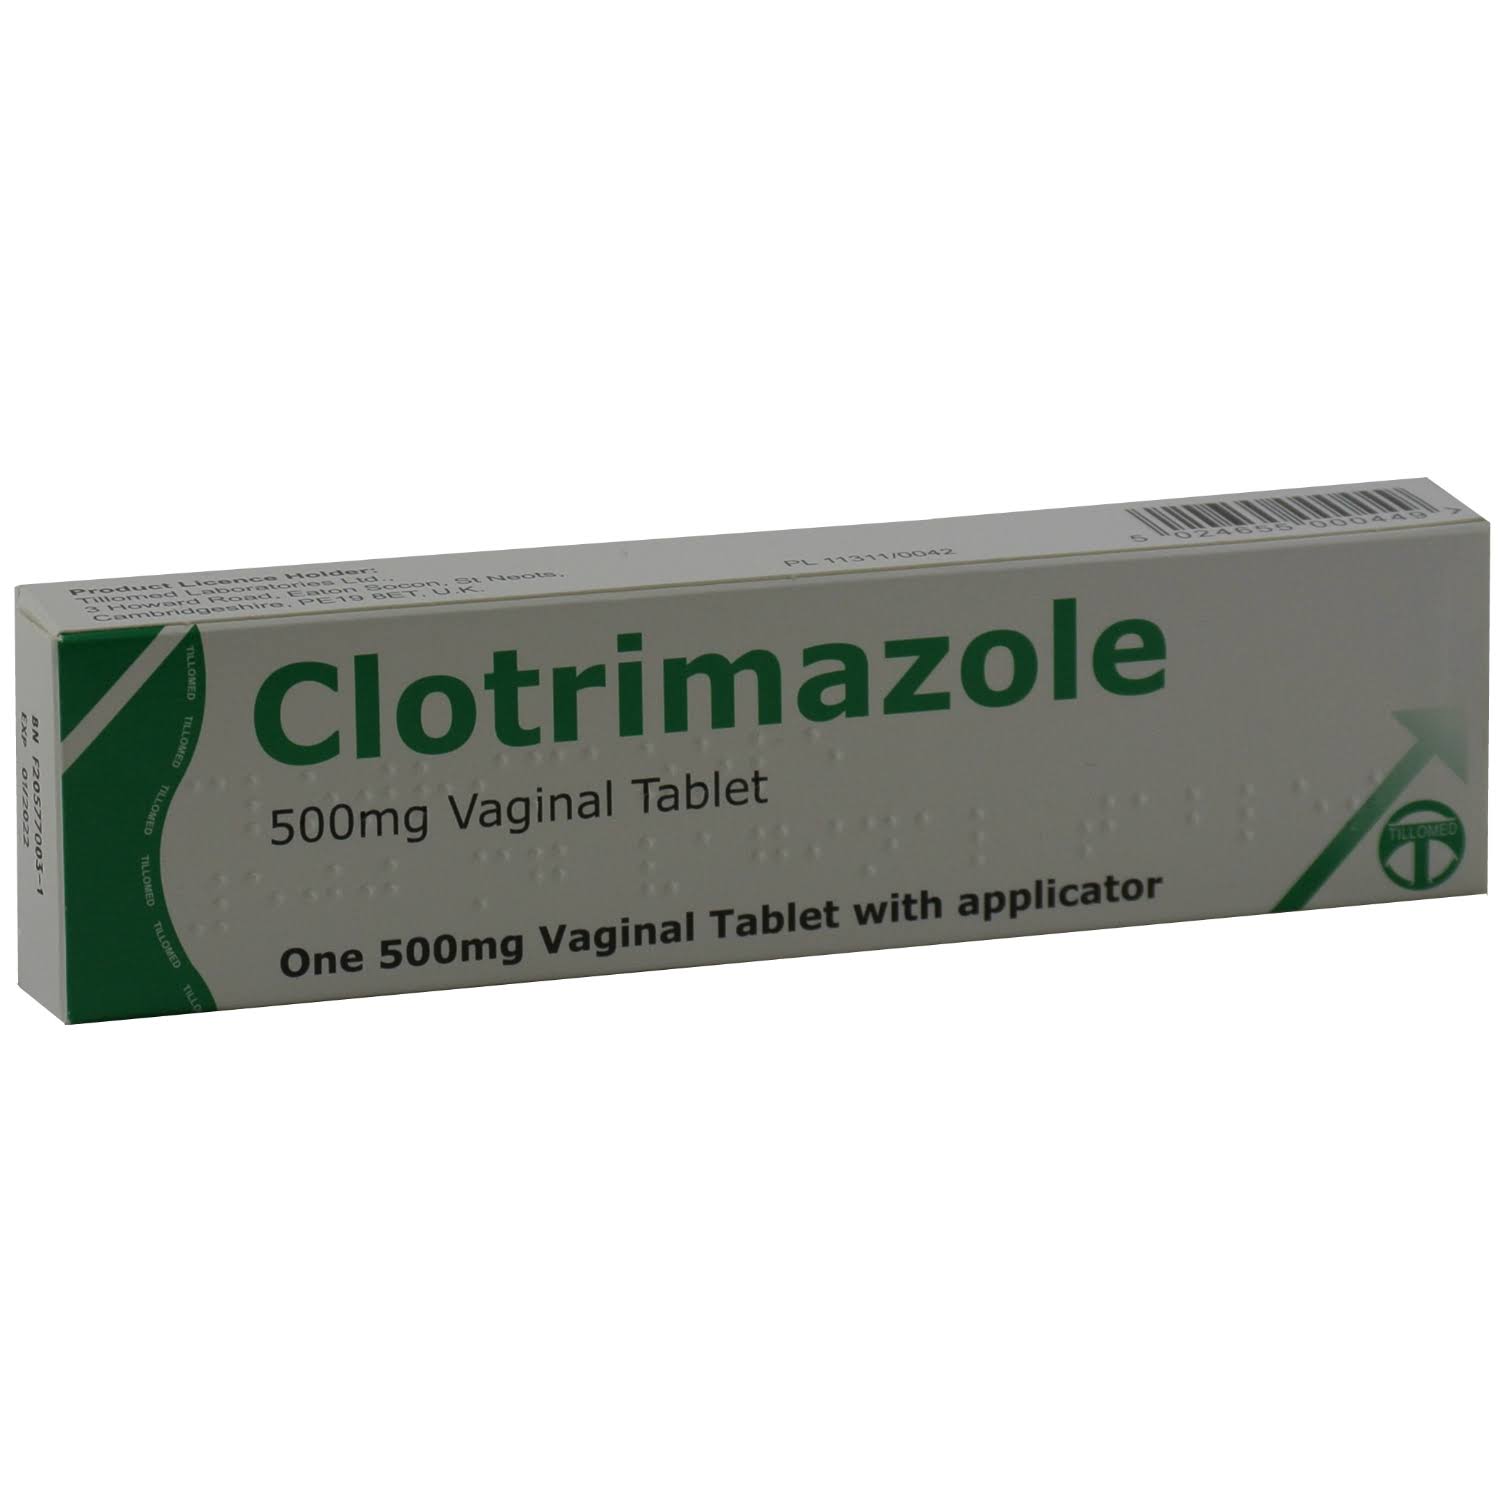 Clotrimazole 500mg Vaginal Tablet with Applicator